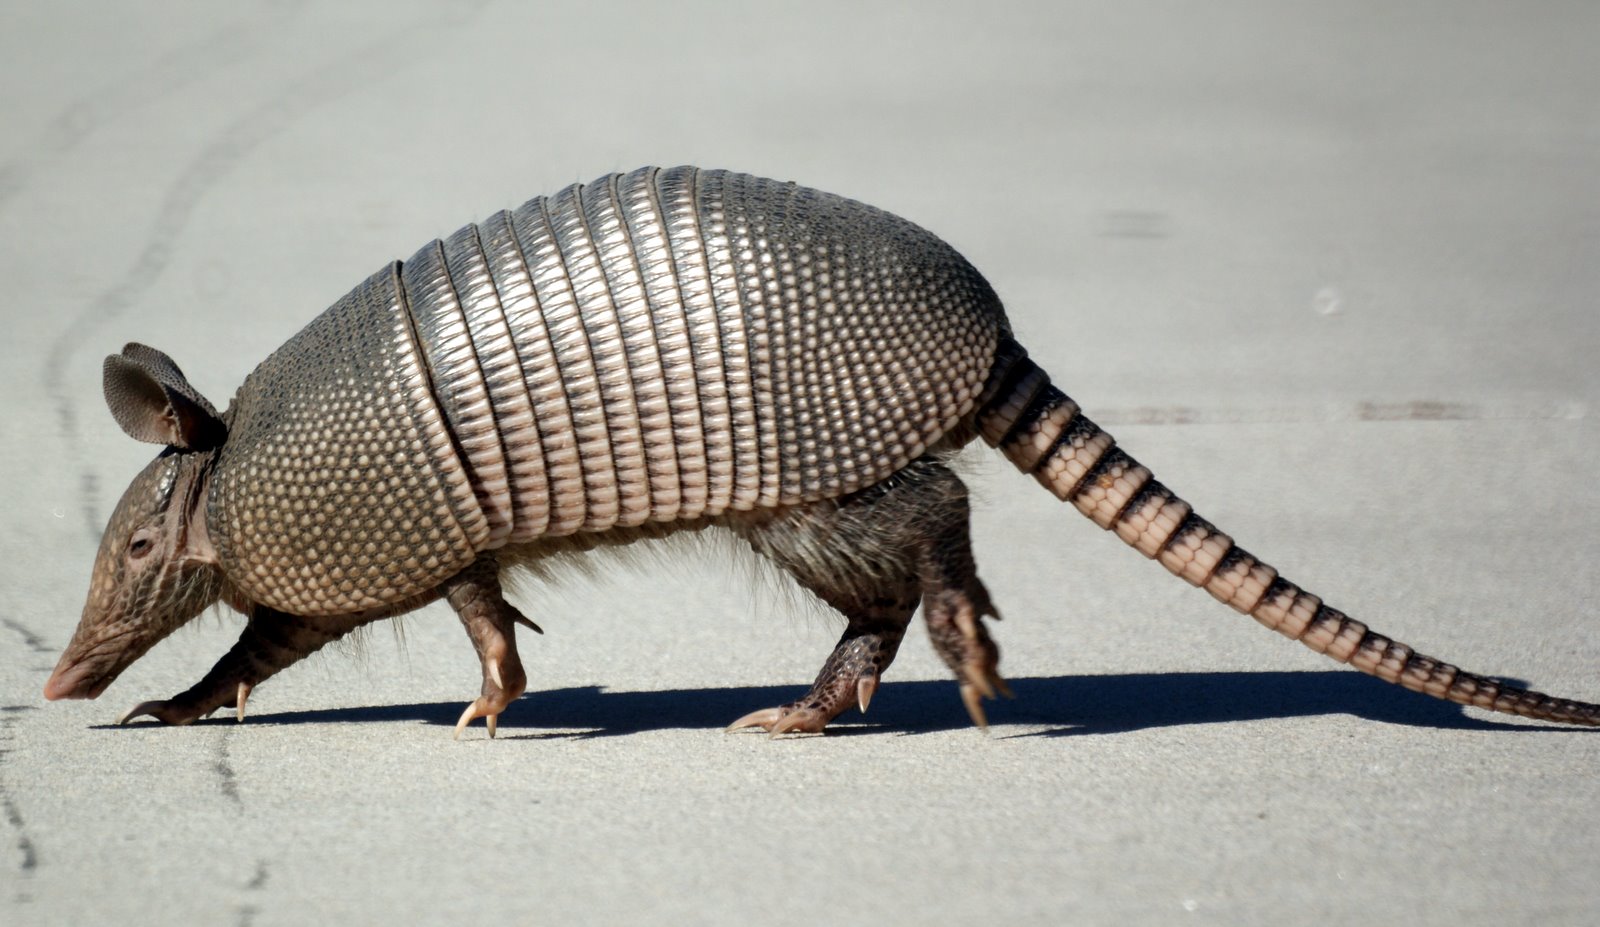 Nice Images Collection: Armadillo Desktop Wallpapers